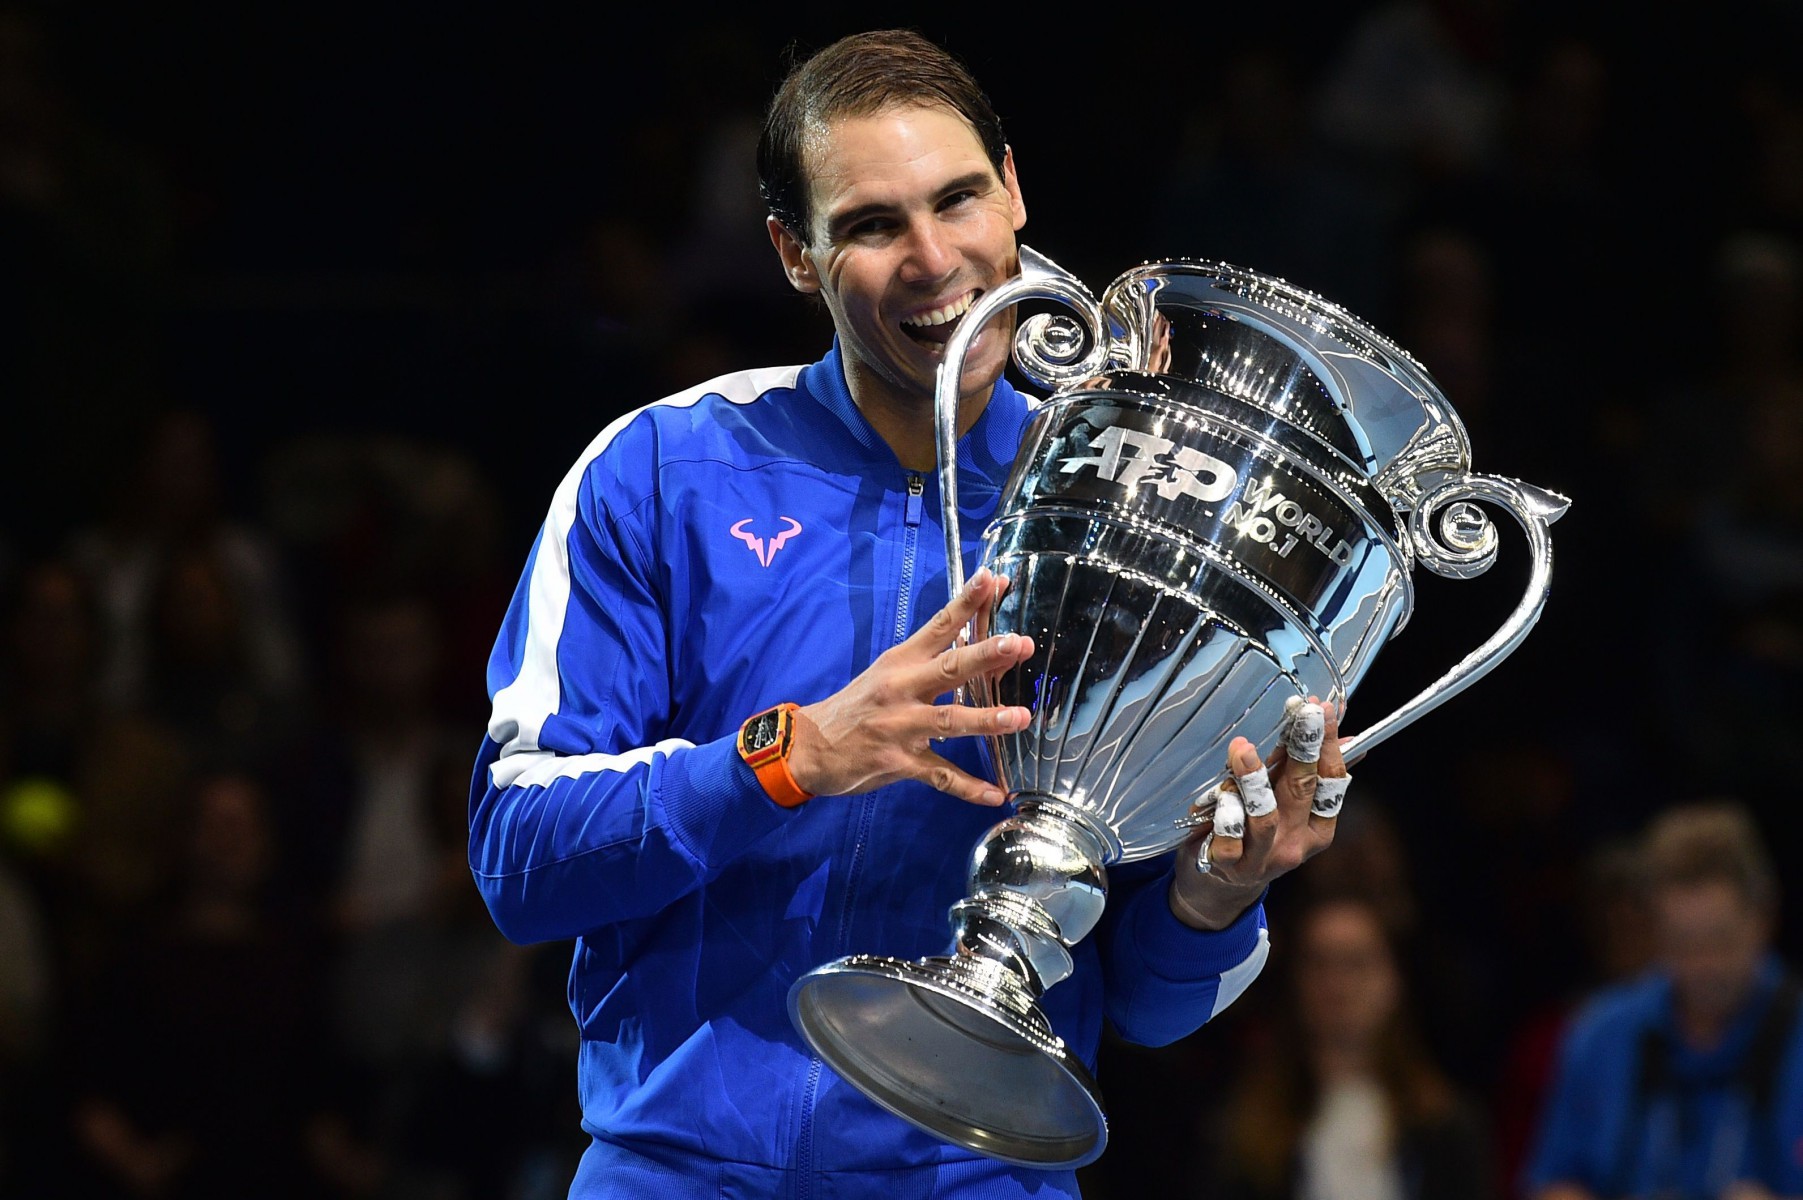 , Rafael Nadal presented with world No1 trophy after epic comeback win against Stefanos Tsitsipas at ATP Finals